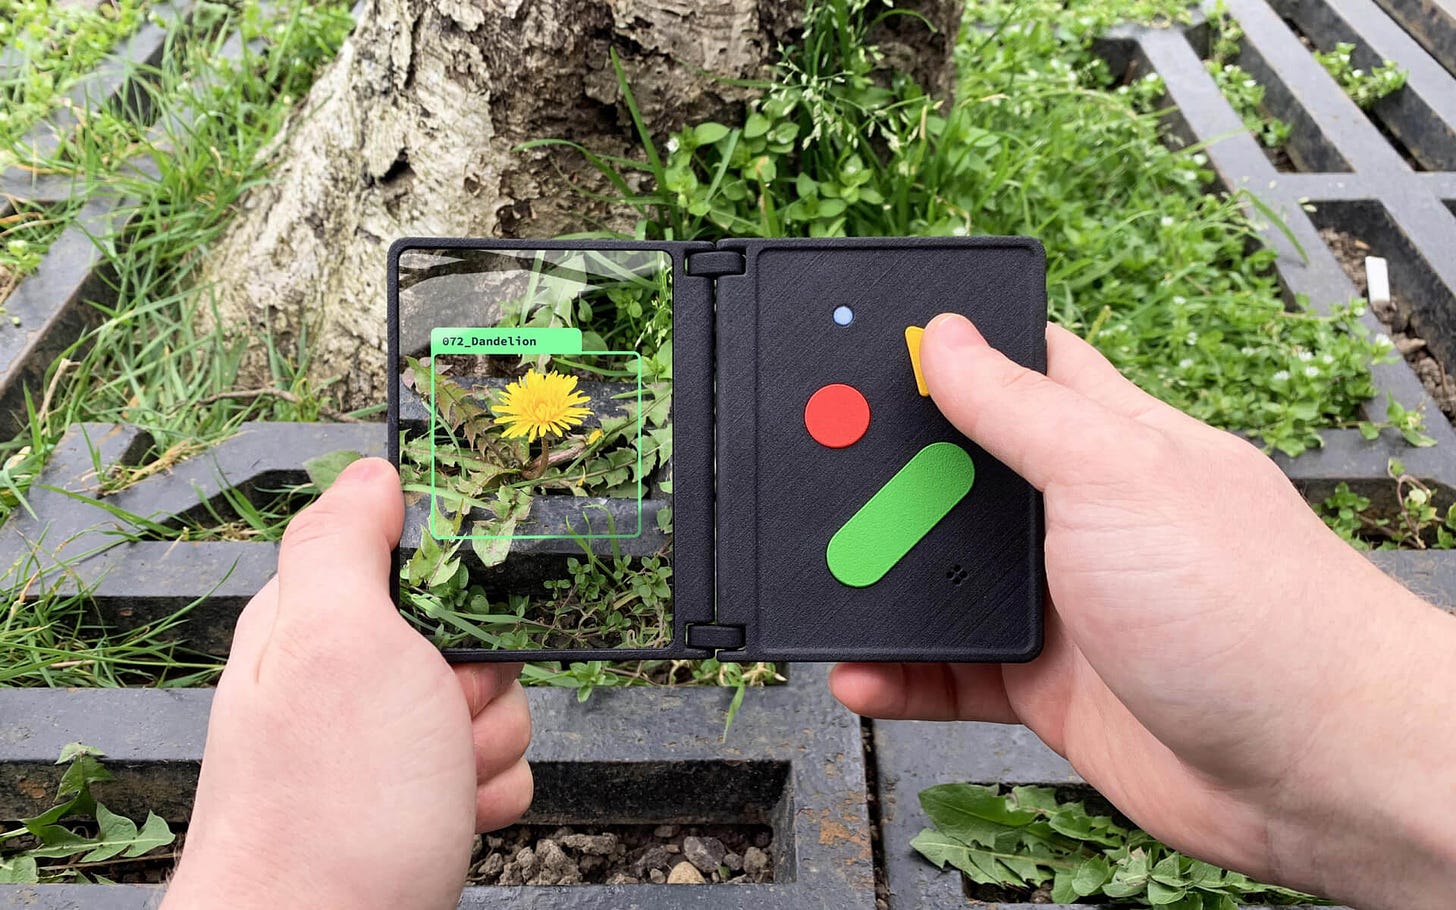 Ash is a pocket AI device that helps curious people learn about the biodiversity around them.